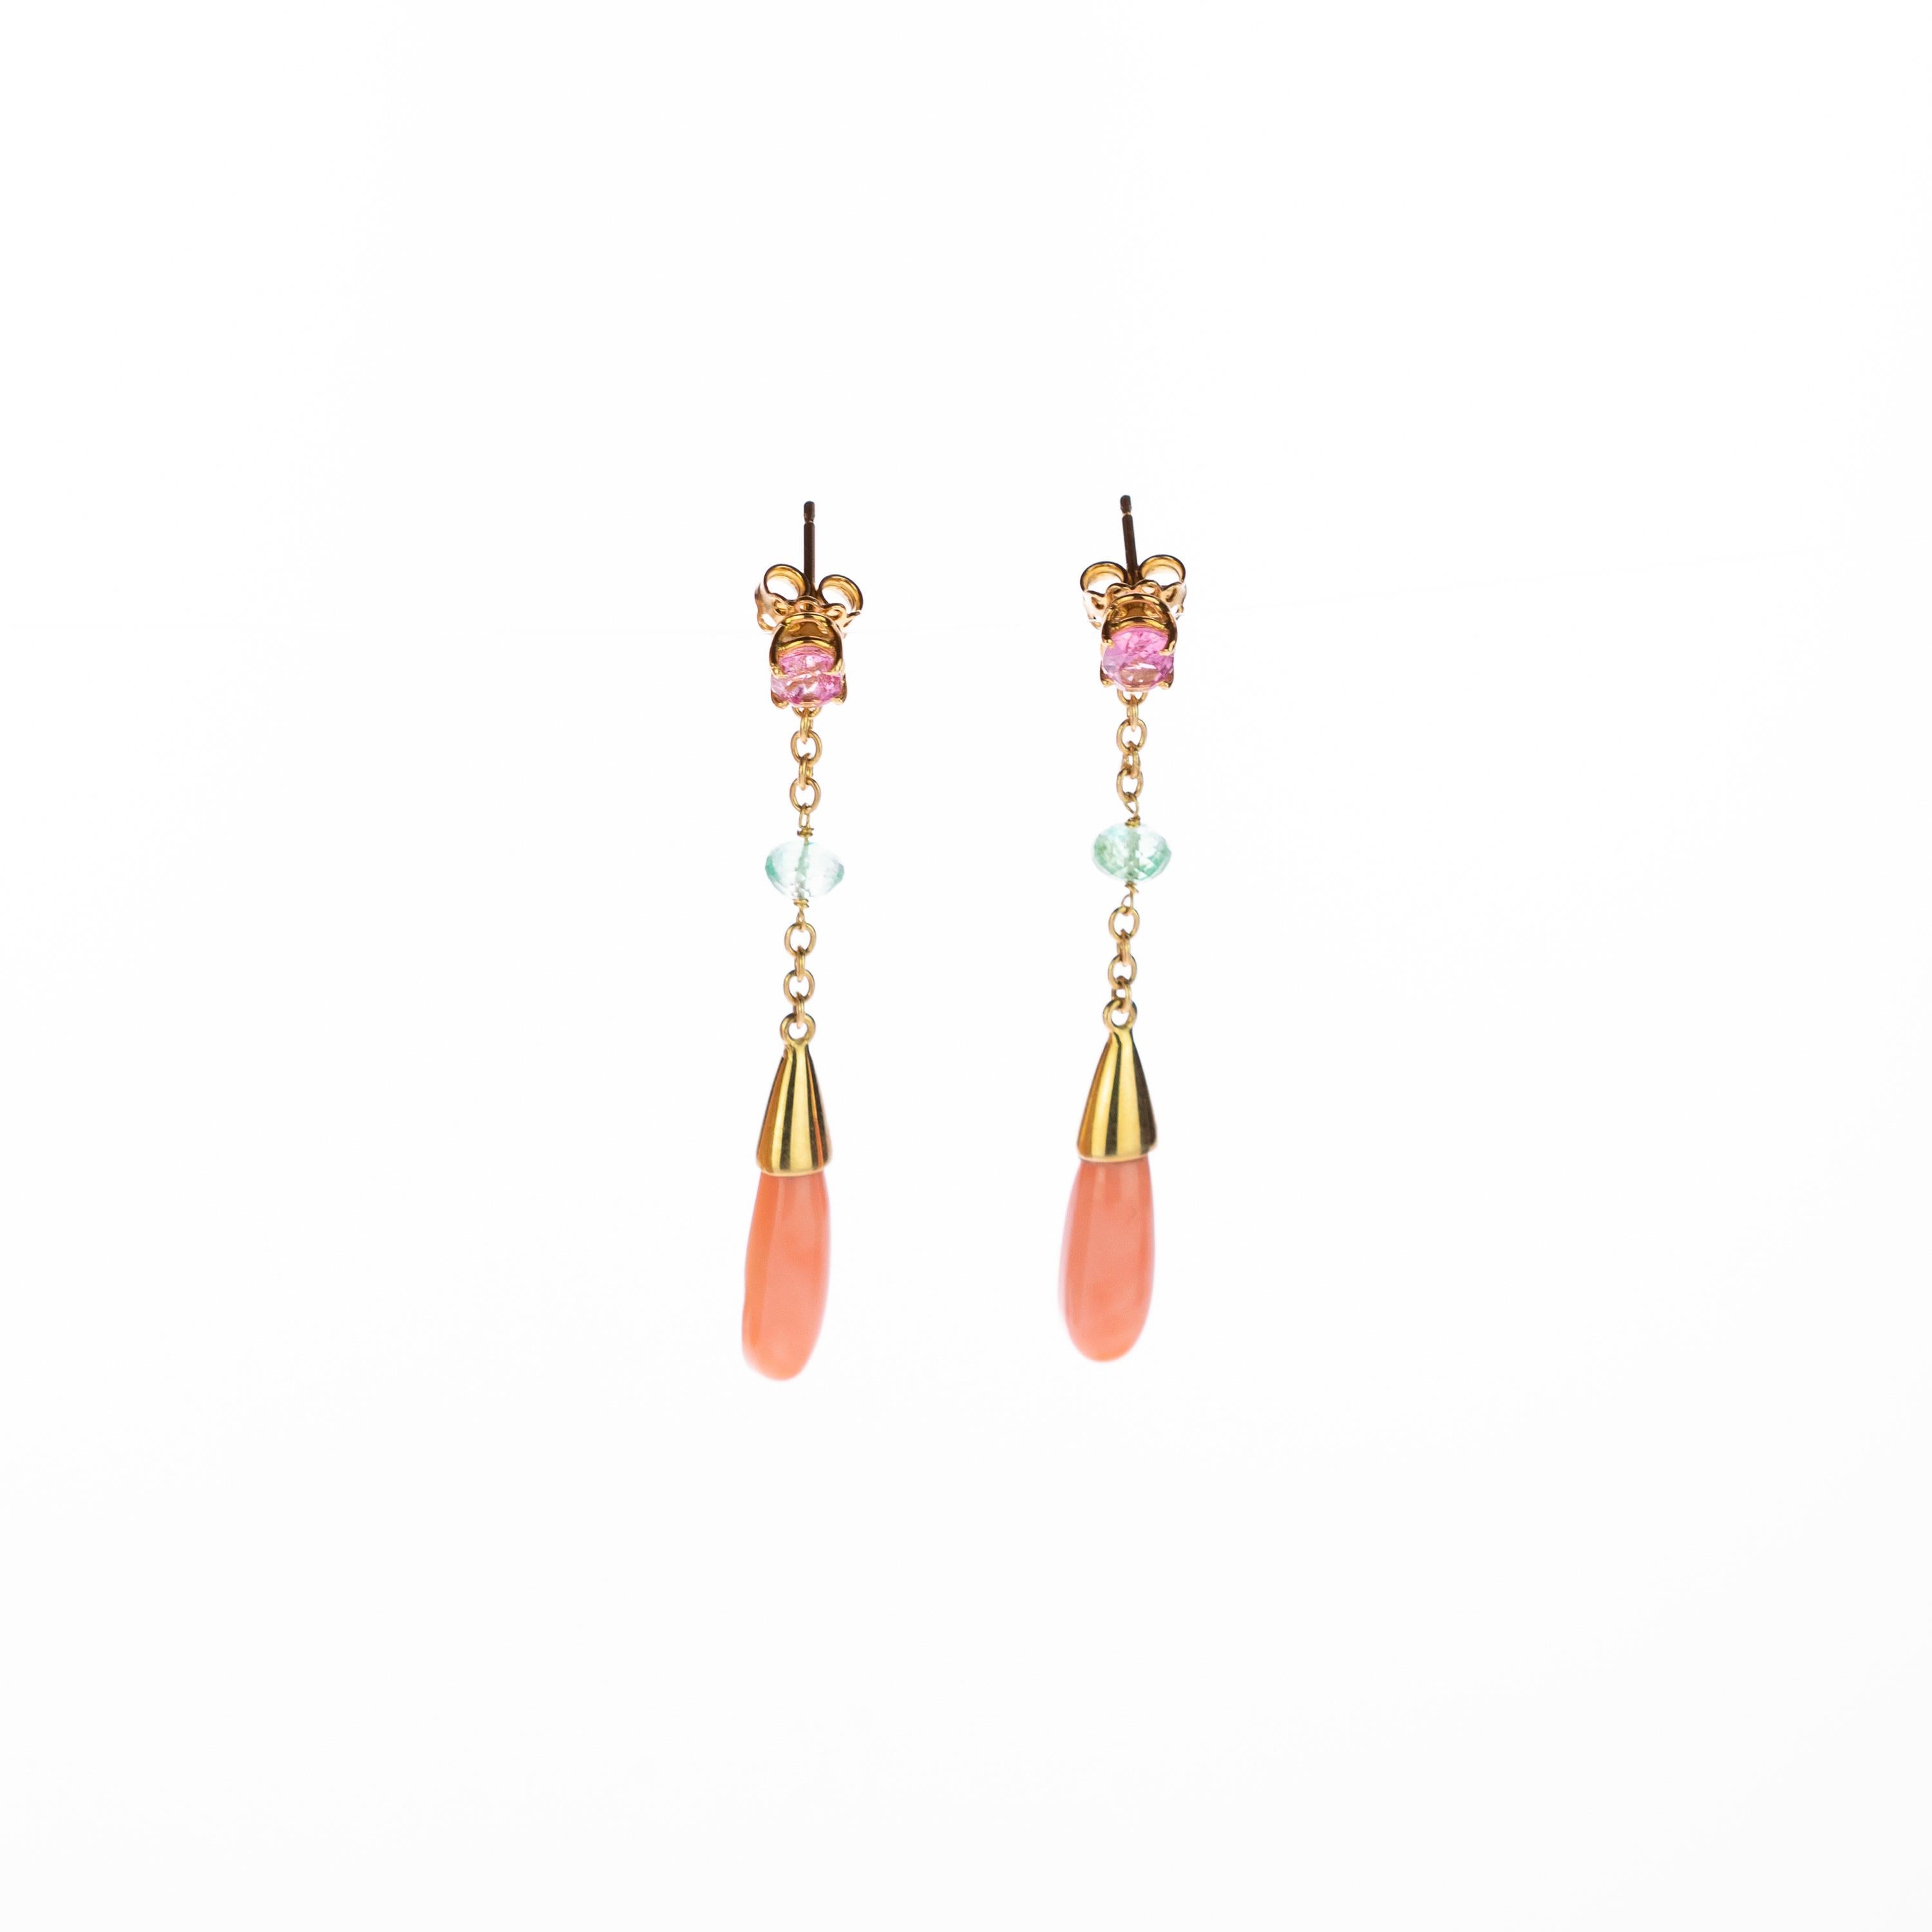 Stunning crafted pink tourmaline round rose drop earrings holded by delicate 18 karat yellow gold chain cammeo pink coral that ends in a gold cone and light pink coral drops. Evoking all the italian tradition resulting in a stunning masterpiece with